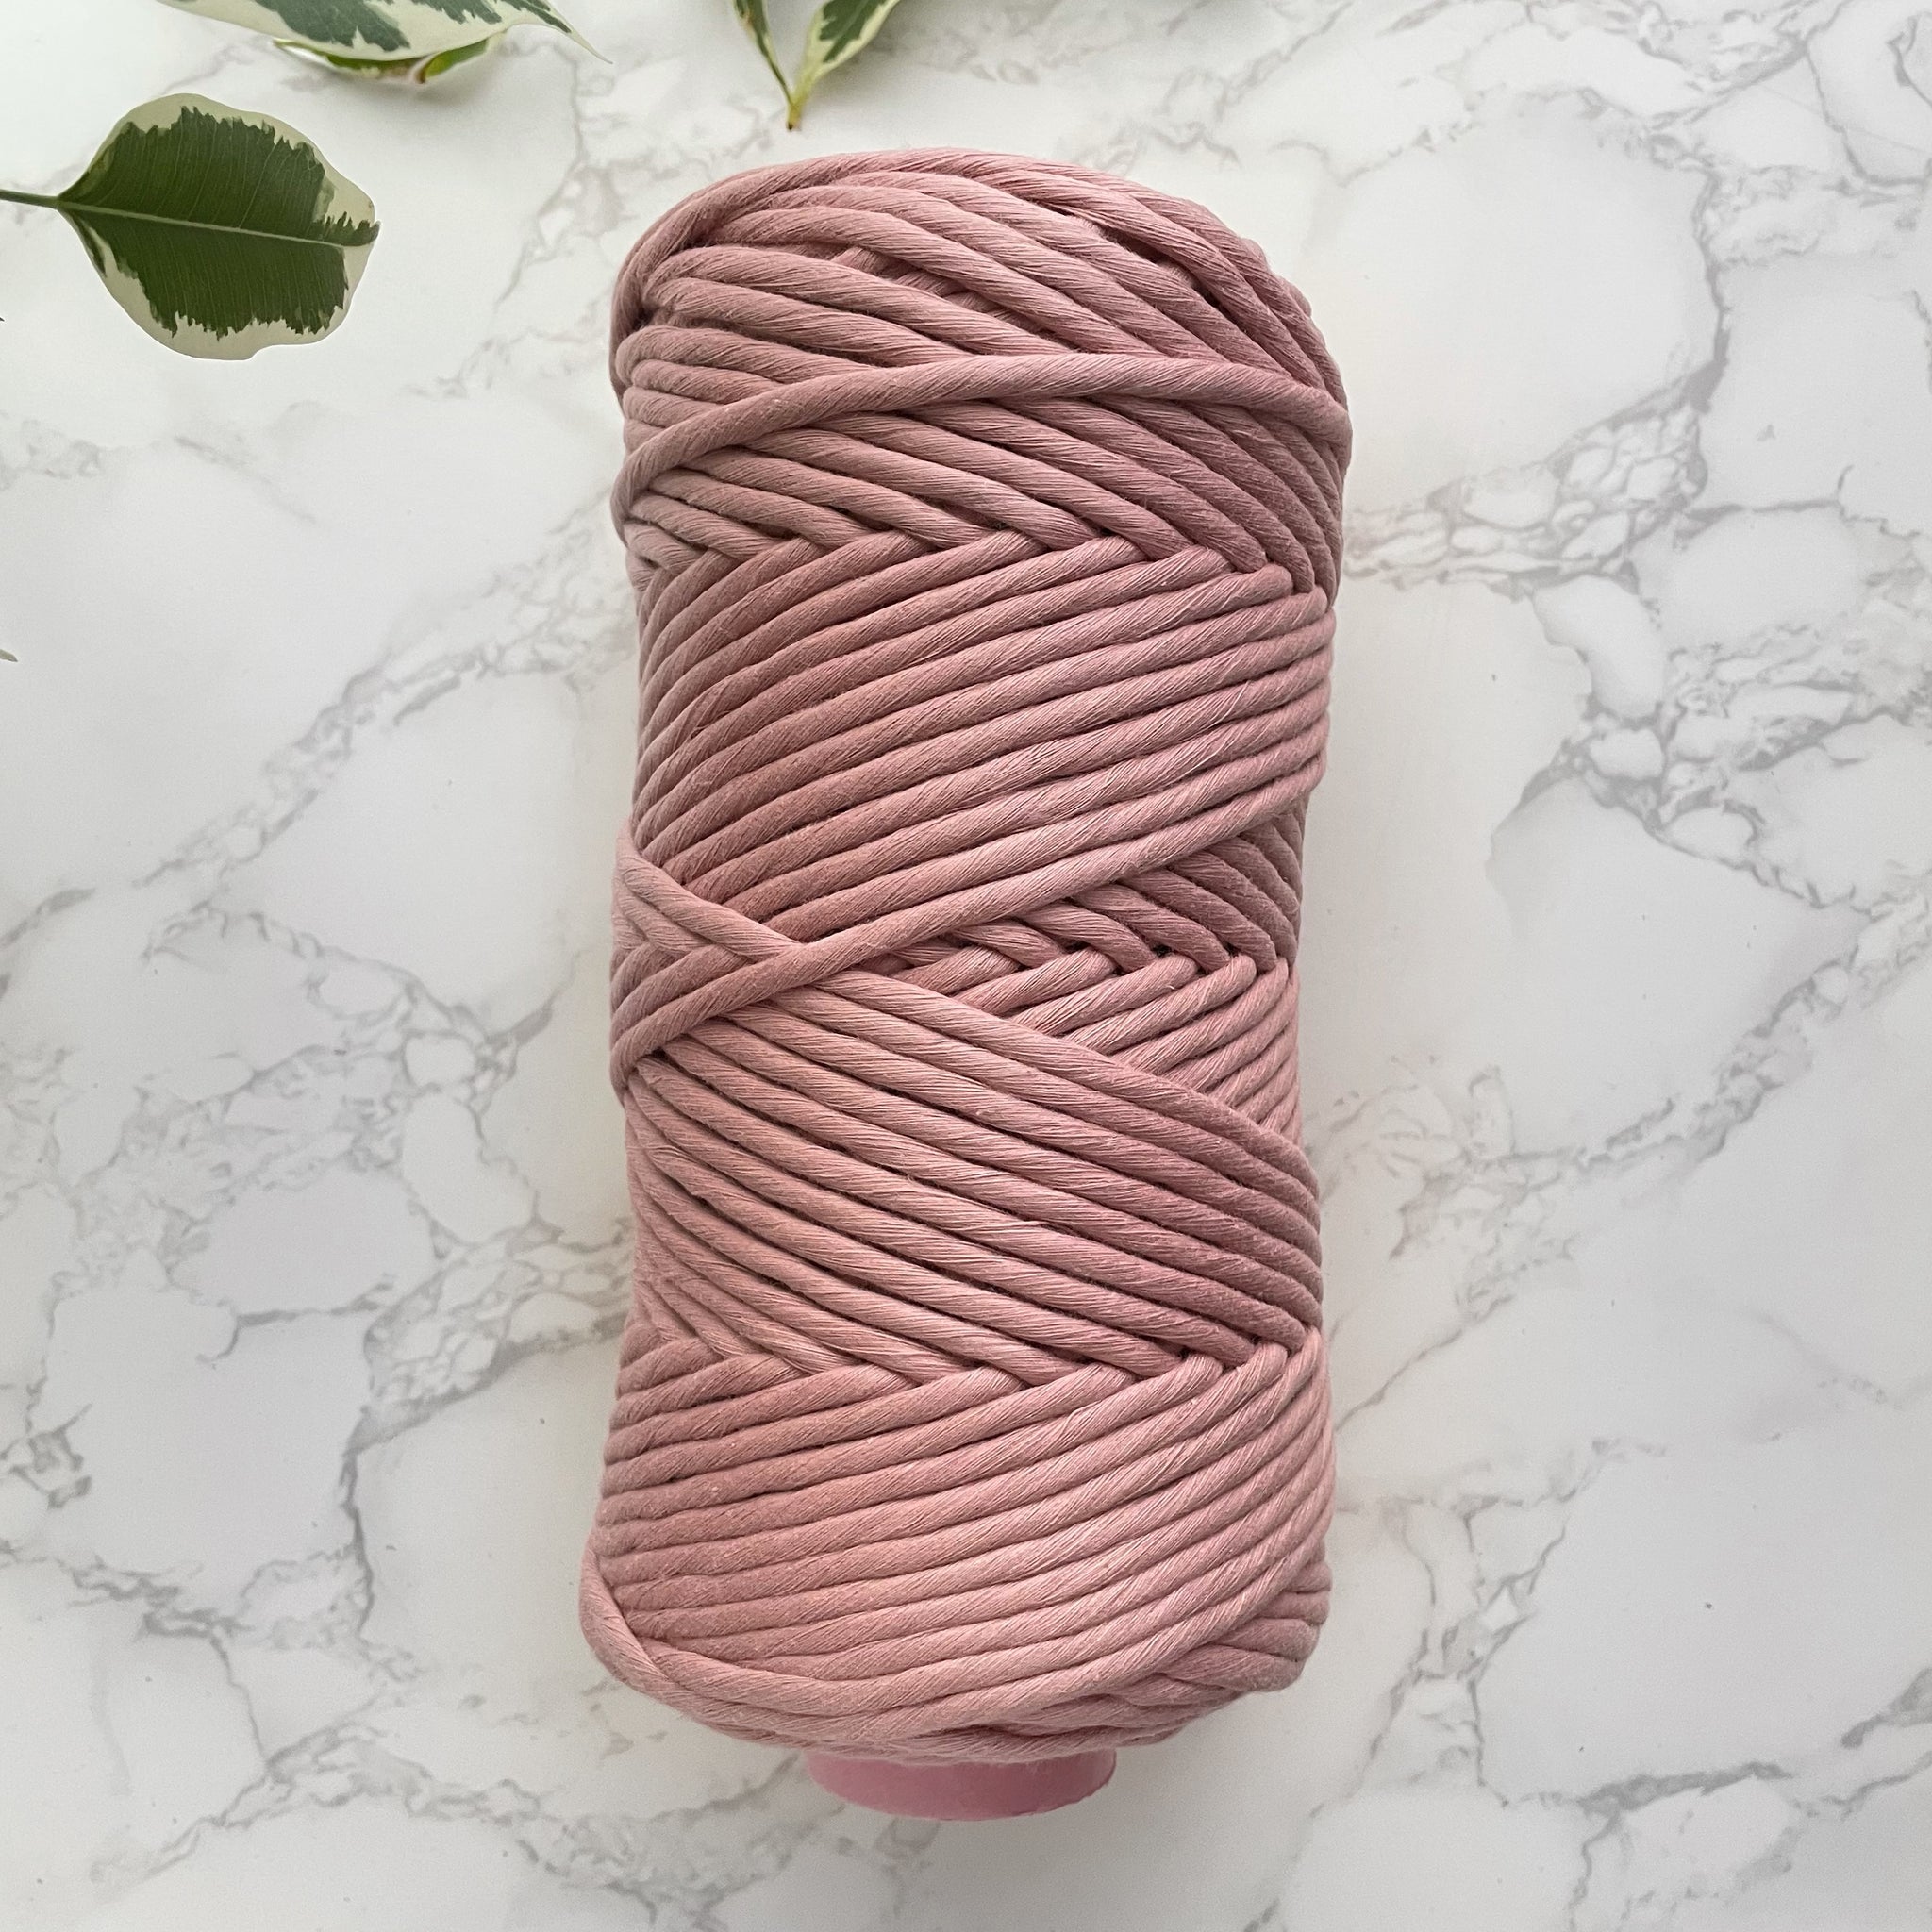 5mm PREMIUM Egyptian Cotton String - Pink Taupe